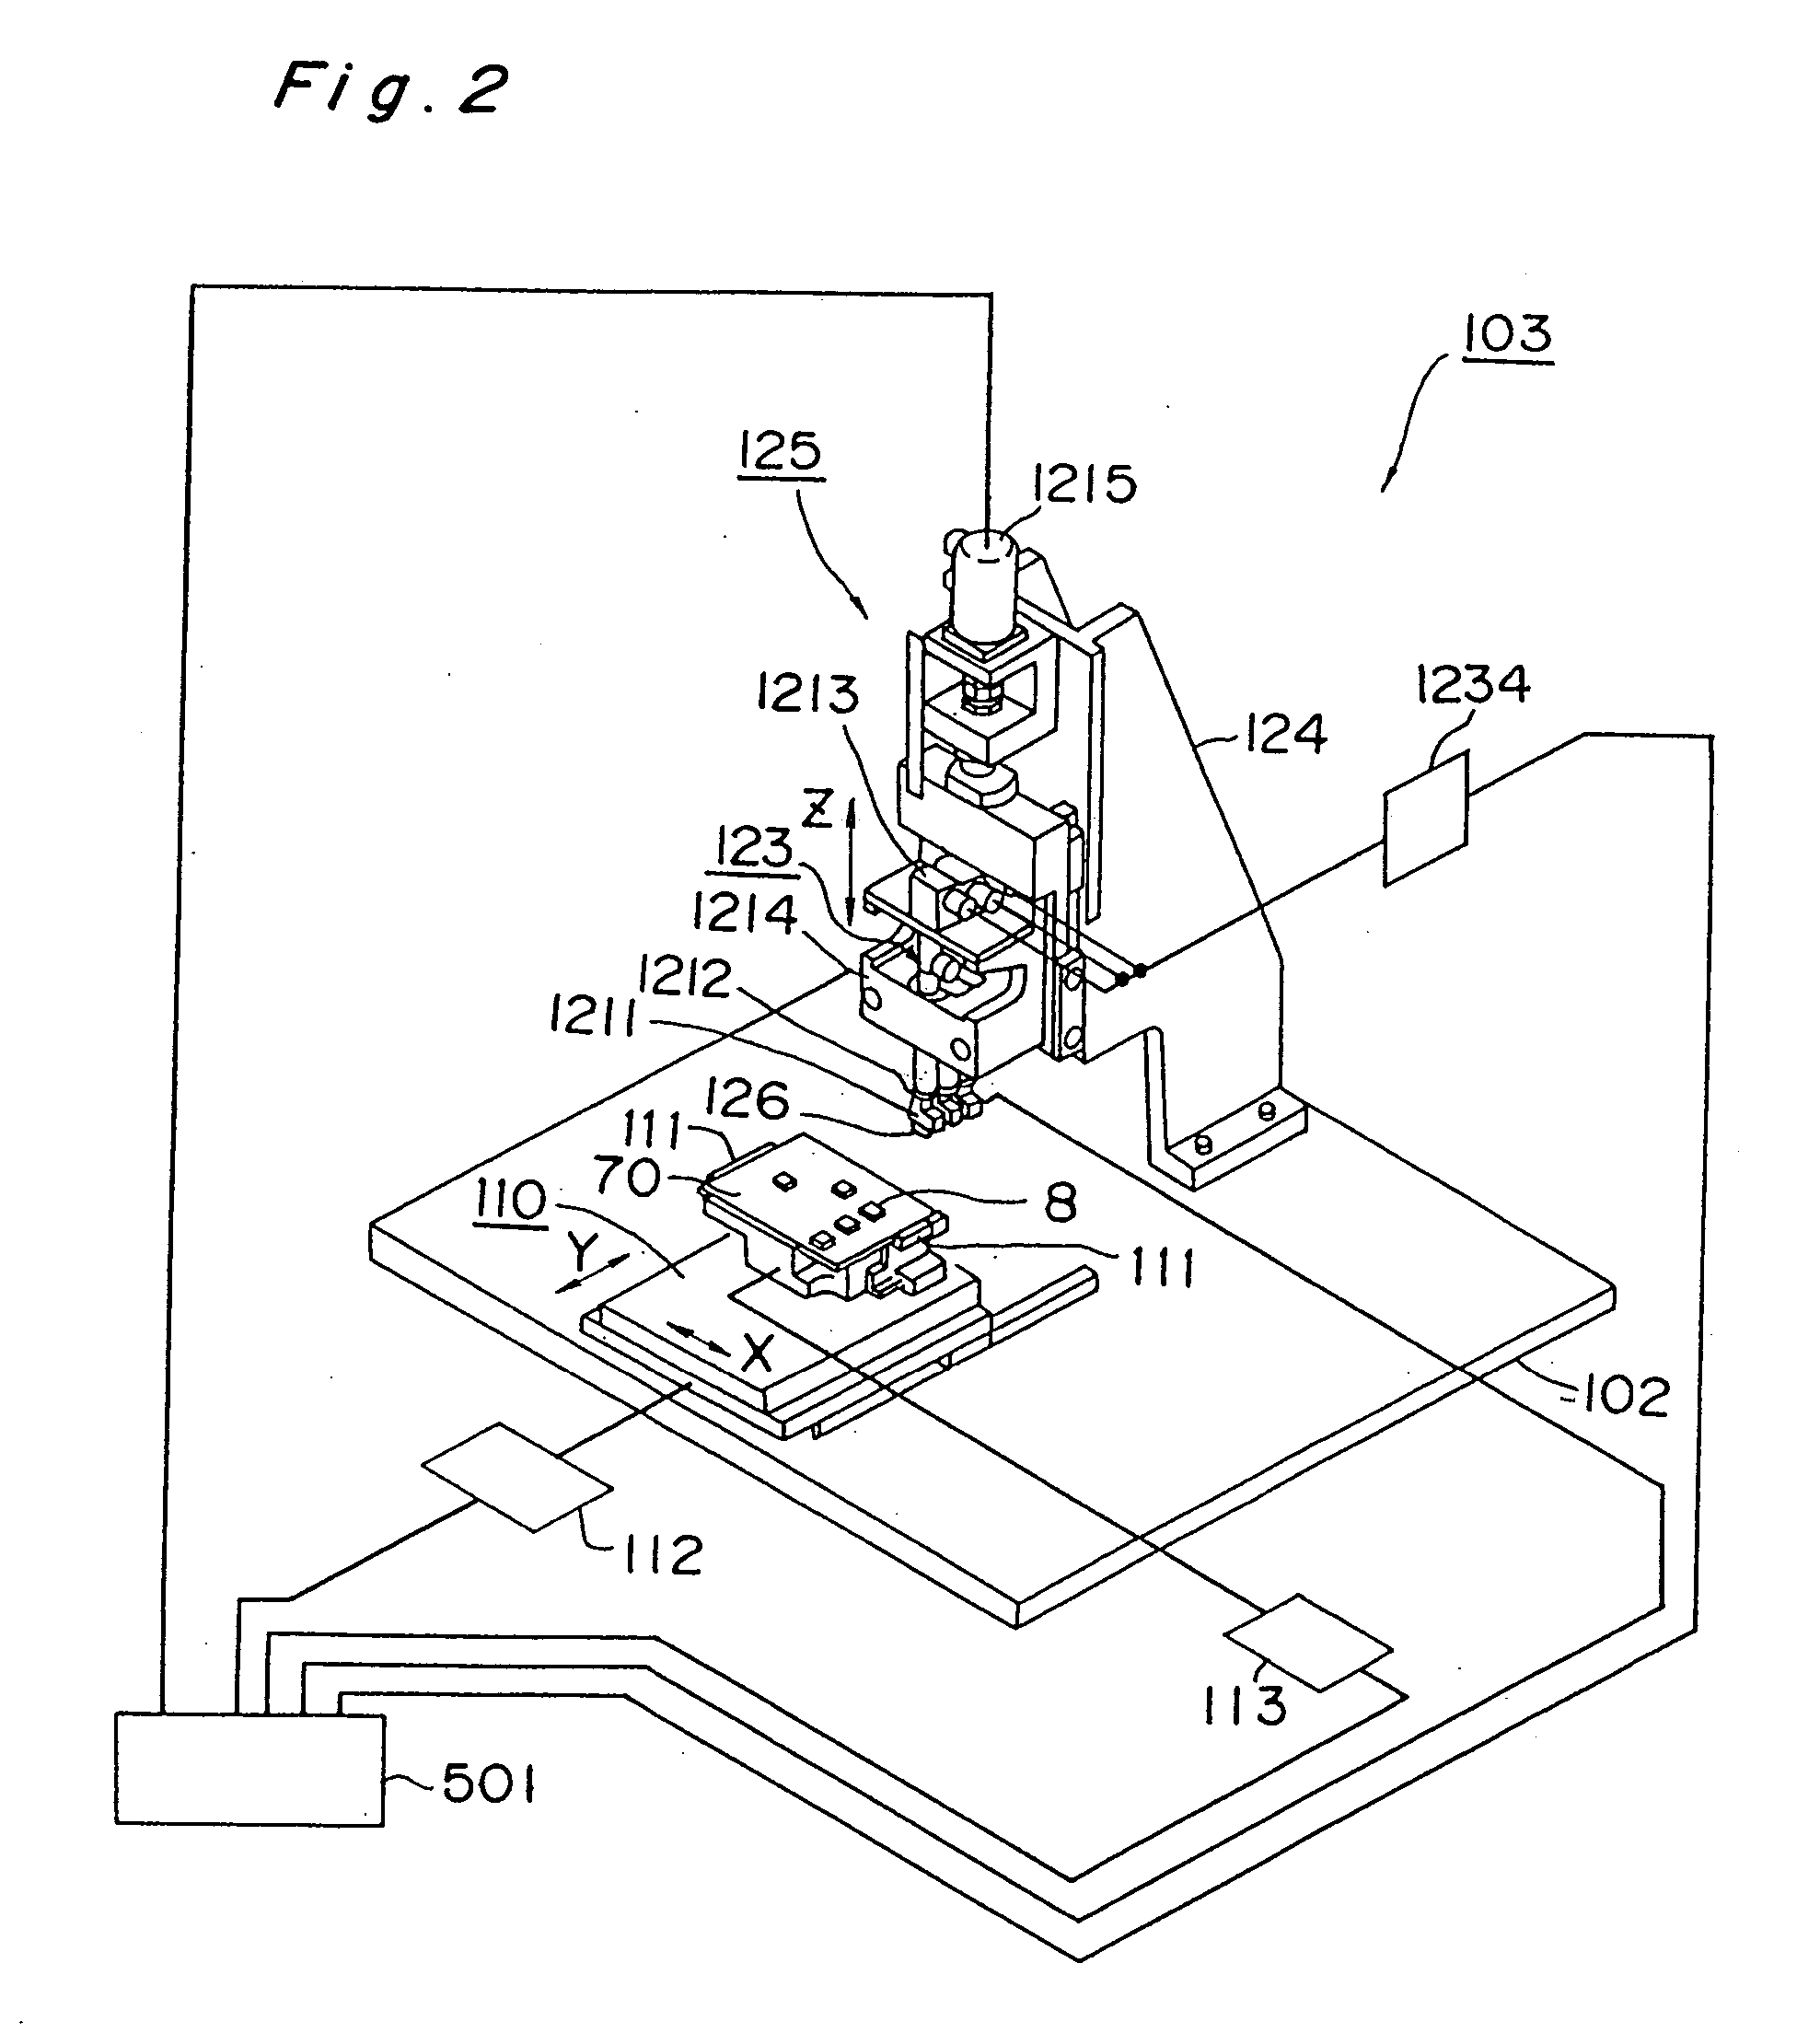 Heating and pressurizing apparatus for use in mounting electronic components, and apparatus and method for mounting electronic components